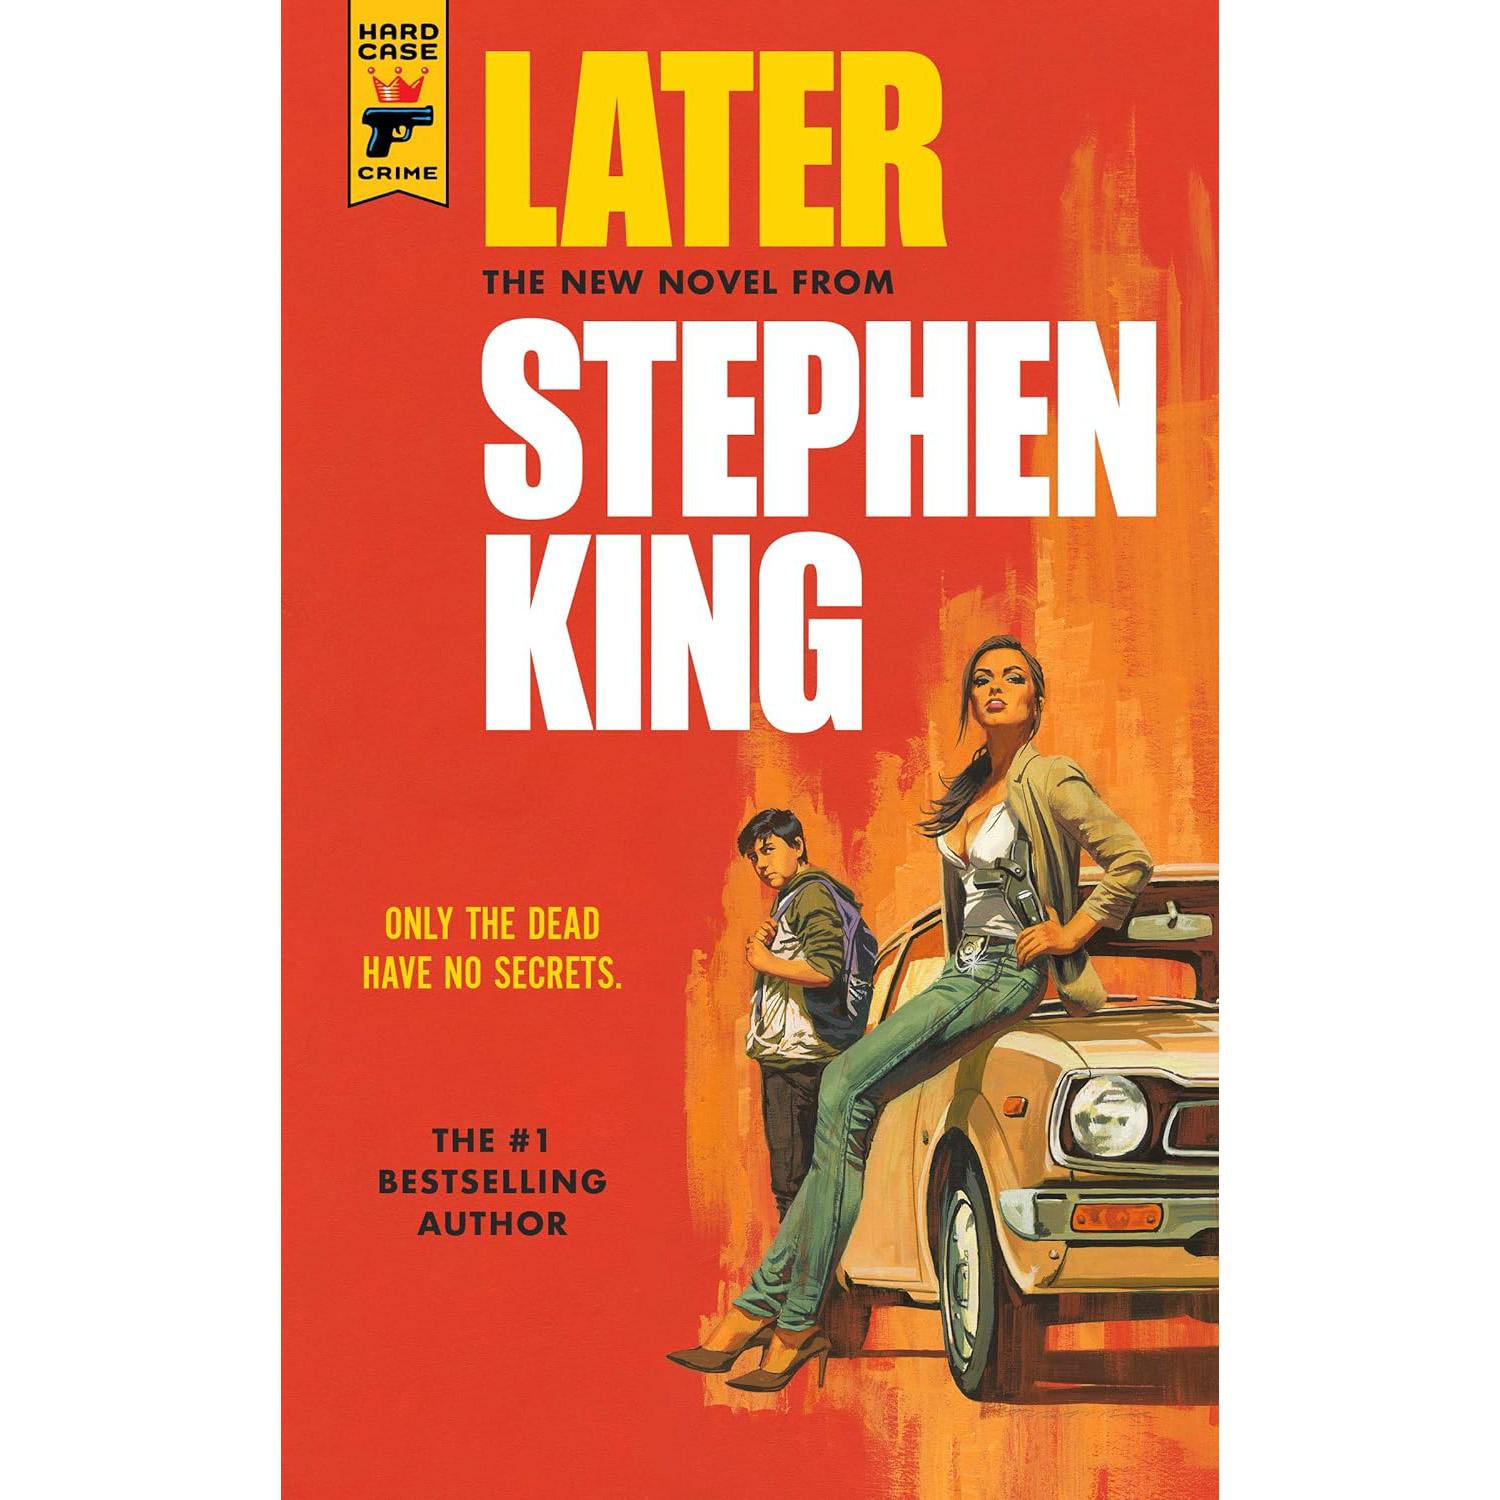 Later by Stephen King eBook for $1.99